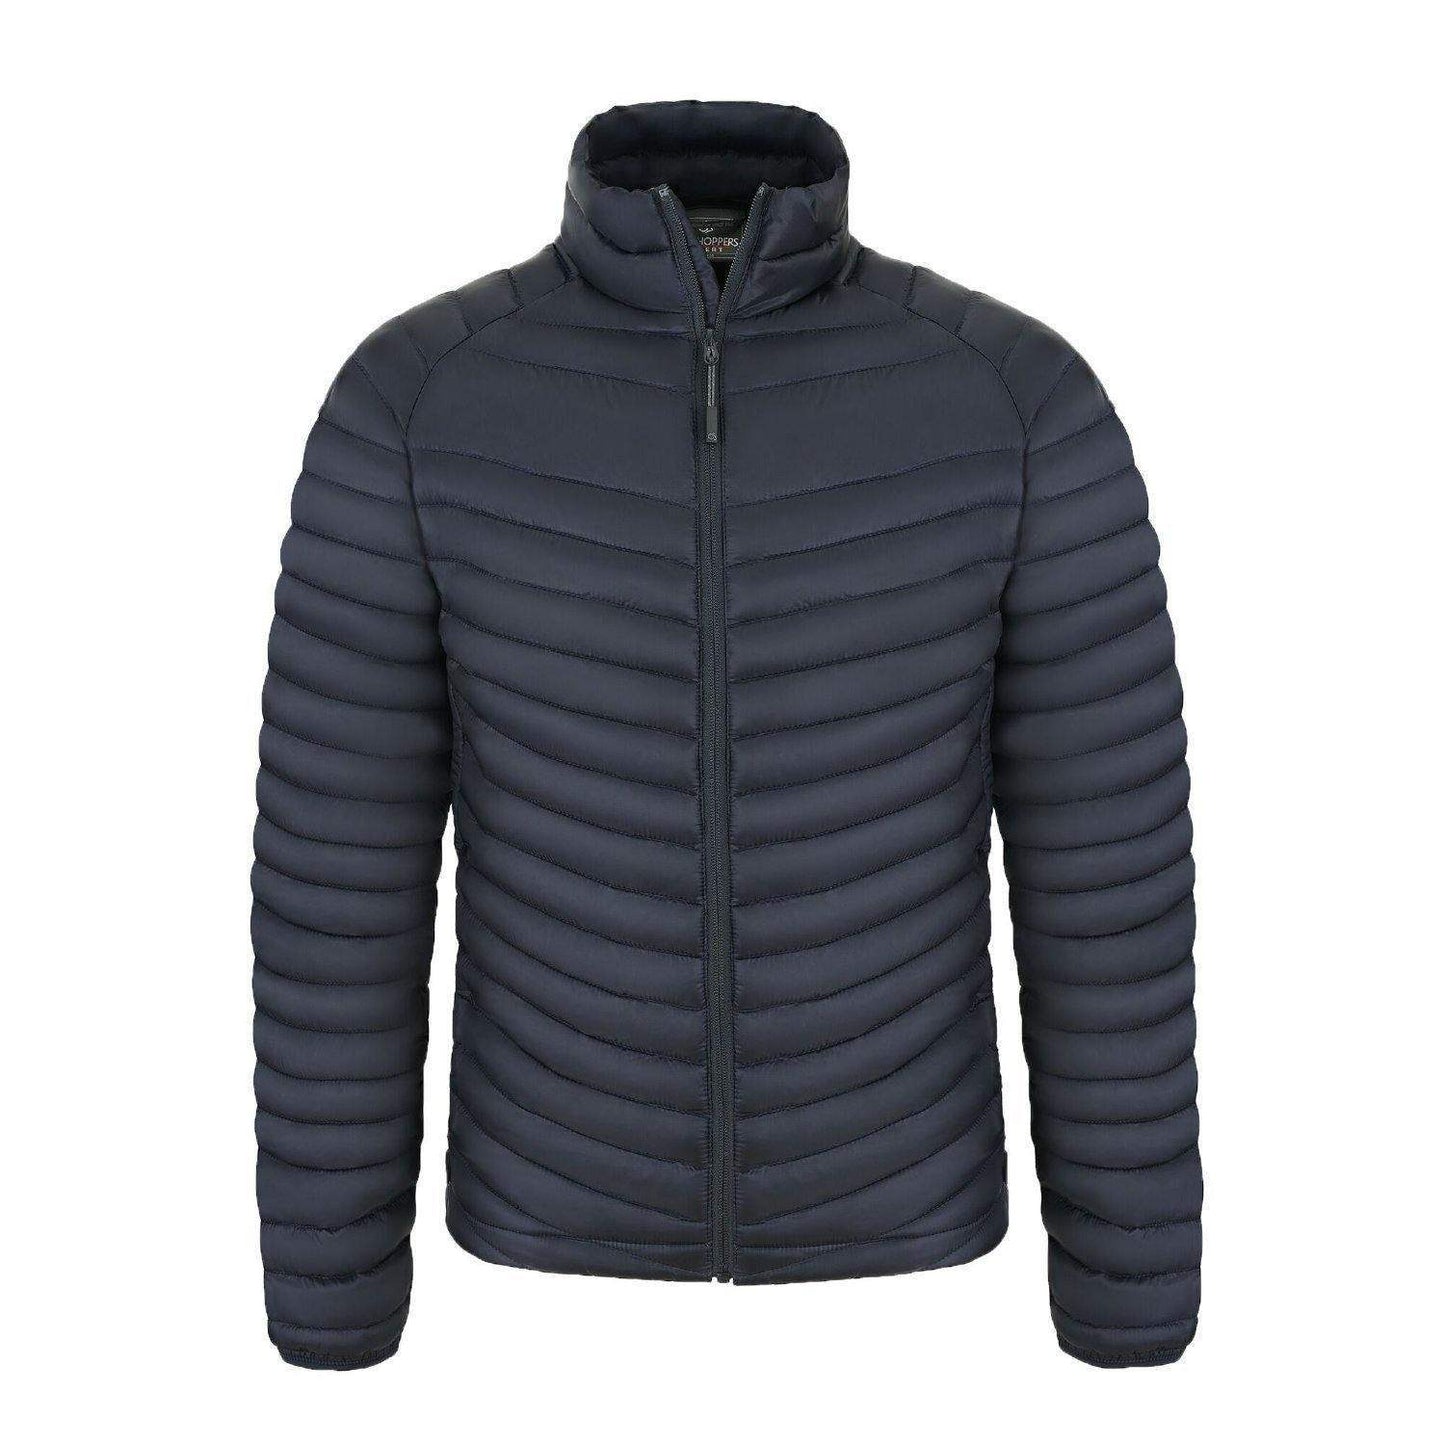 Unisex Expert Expolite Thermal Jacket by Craghoppers - The Luxury Promotional Gifts Company Limited